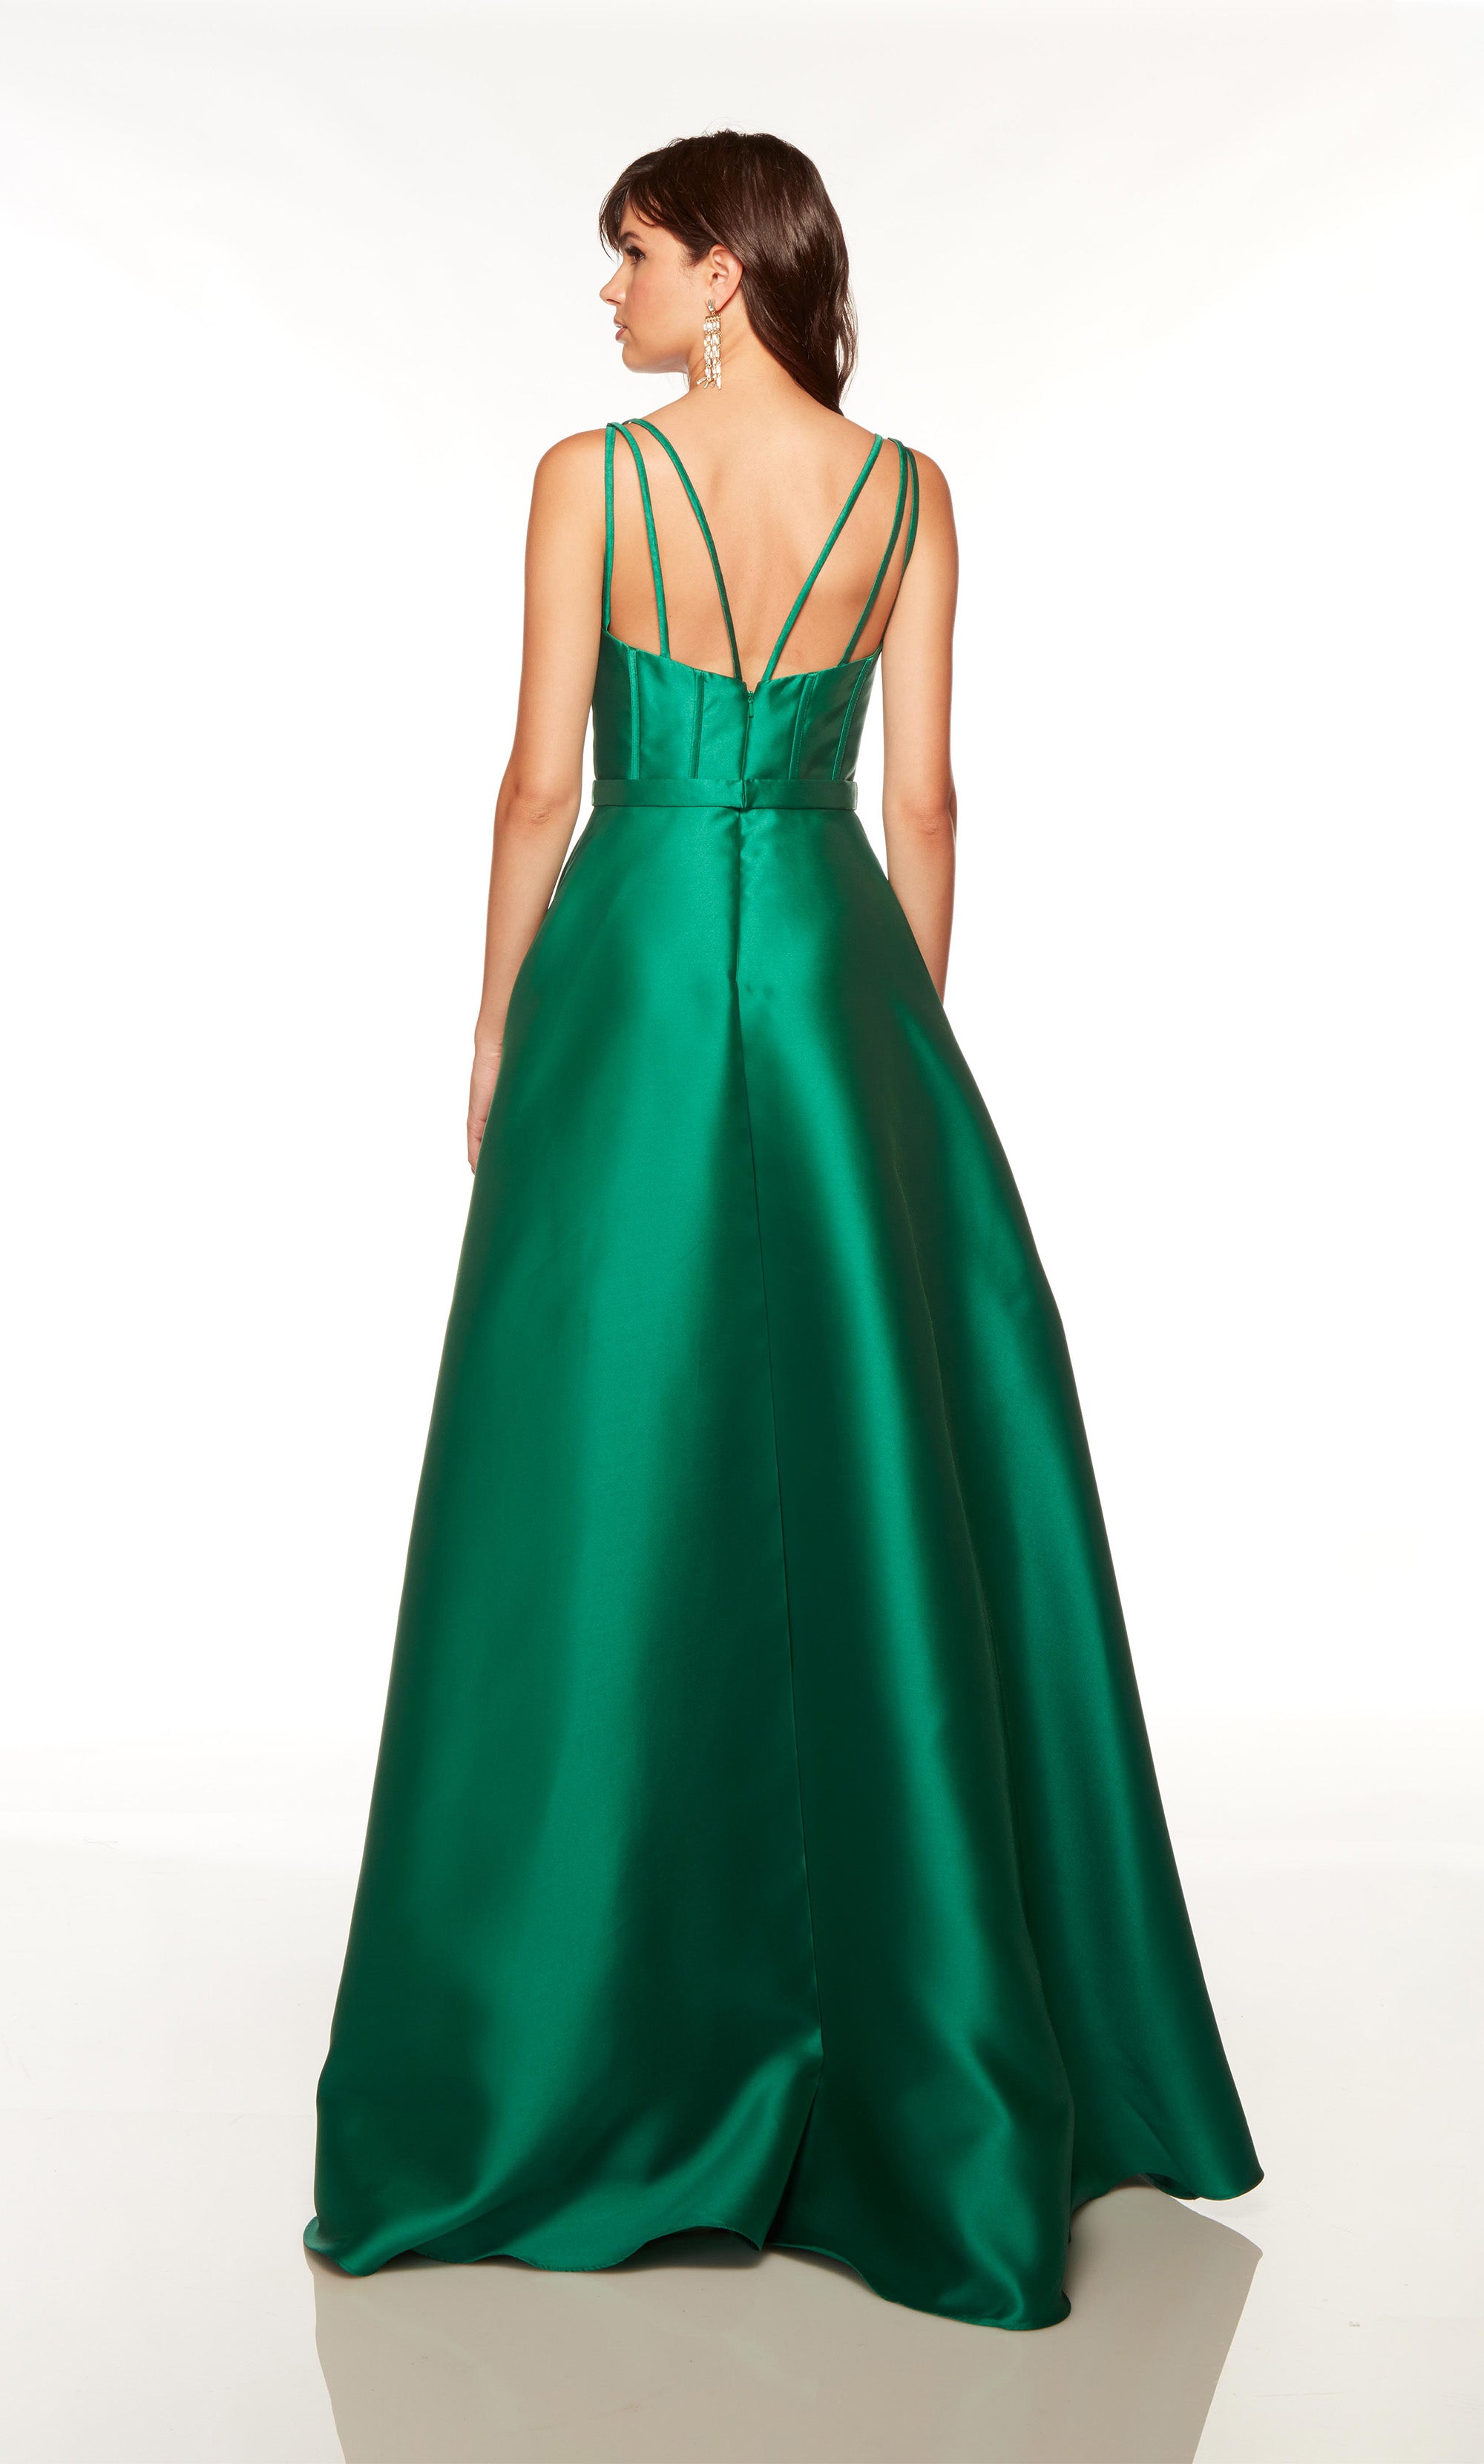 Emerald green prom dress with a scooped neck, corset bodice, belt, and side slit. COLOR-SWATCH_1759__EMERALD